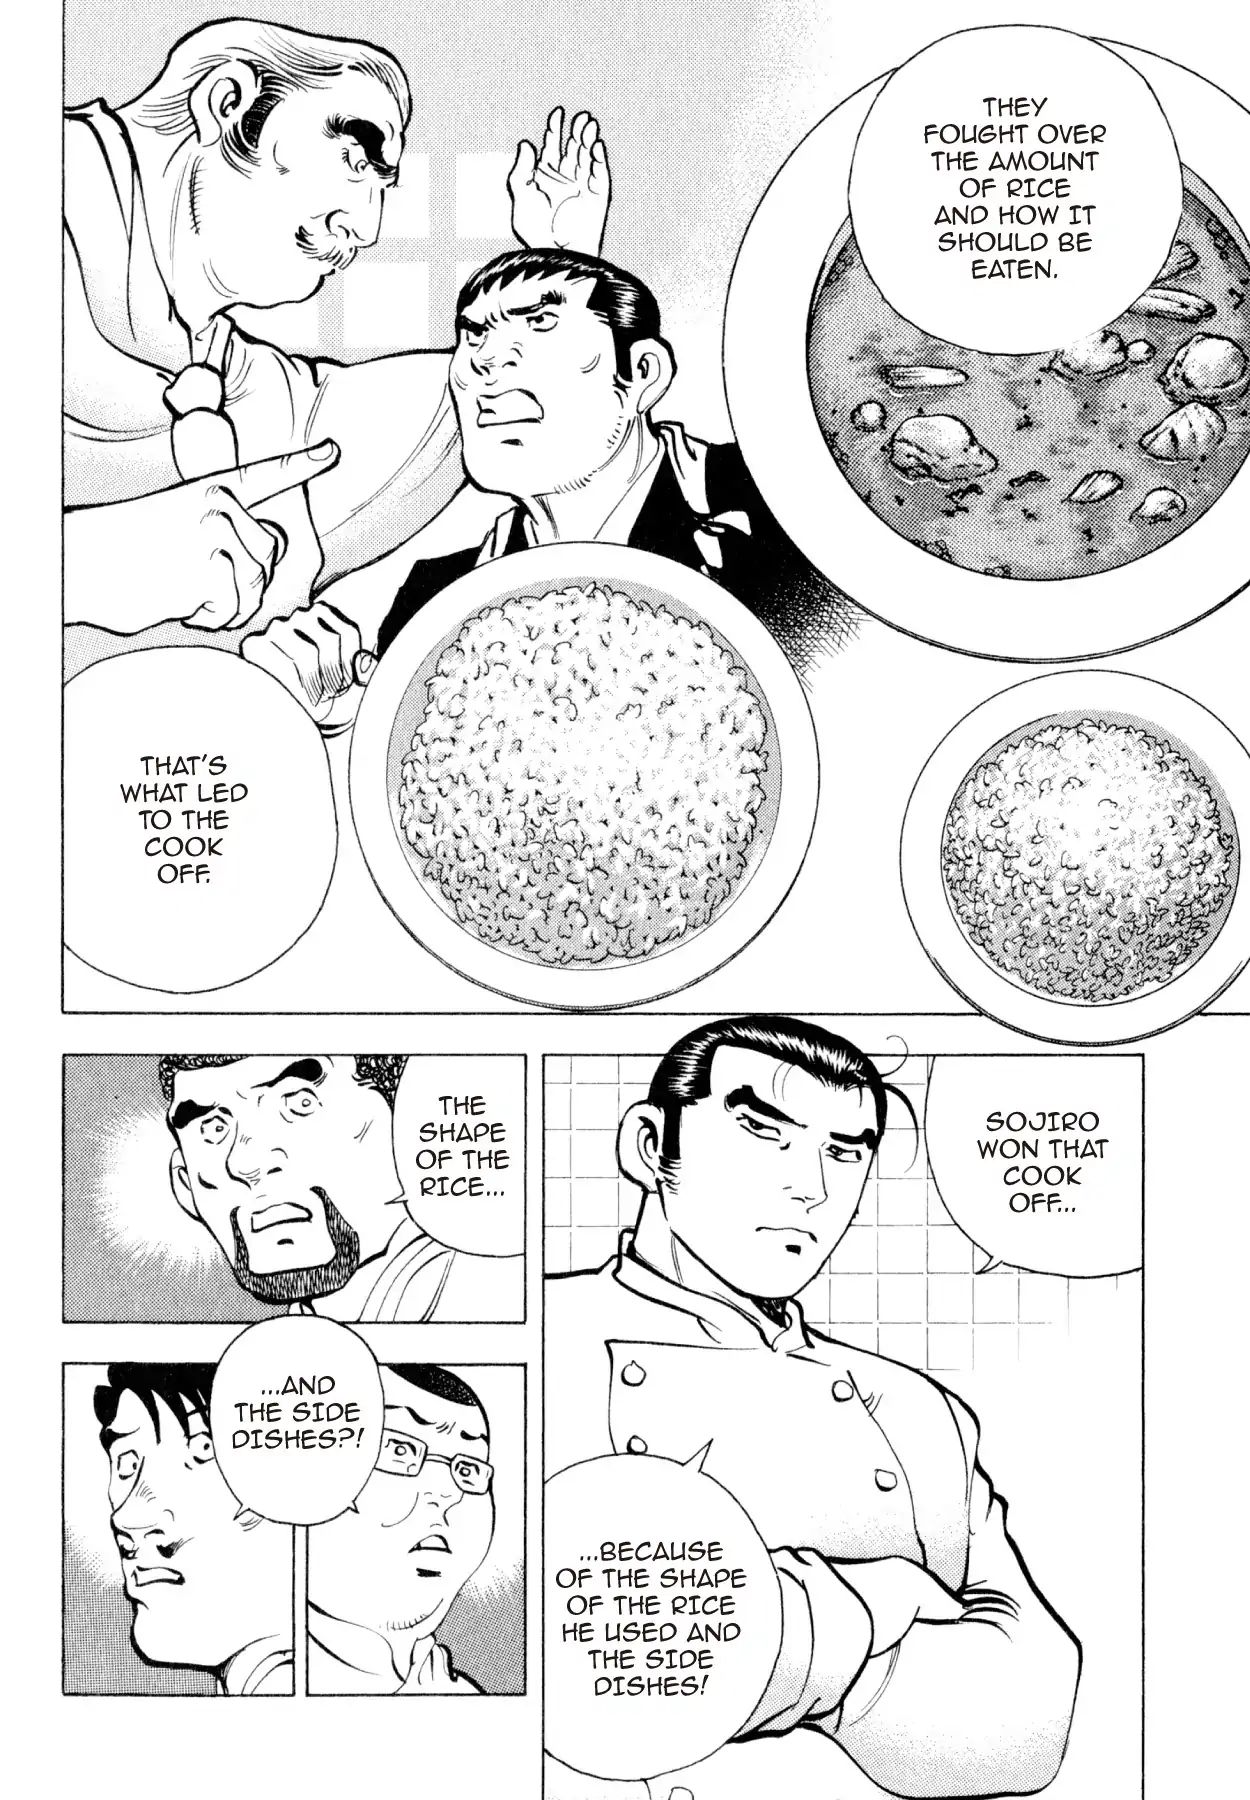 Shoku King VOL.25 CHAPTER 227: THE TWO CURRIES